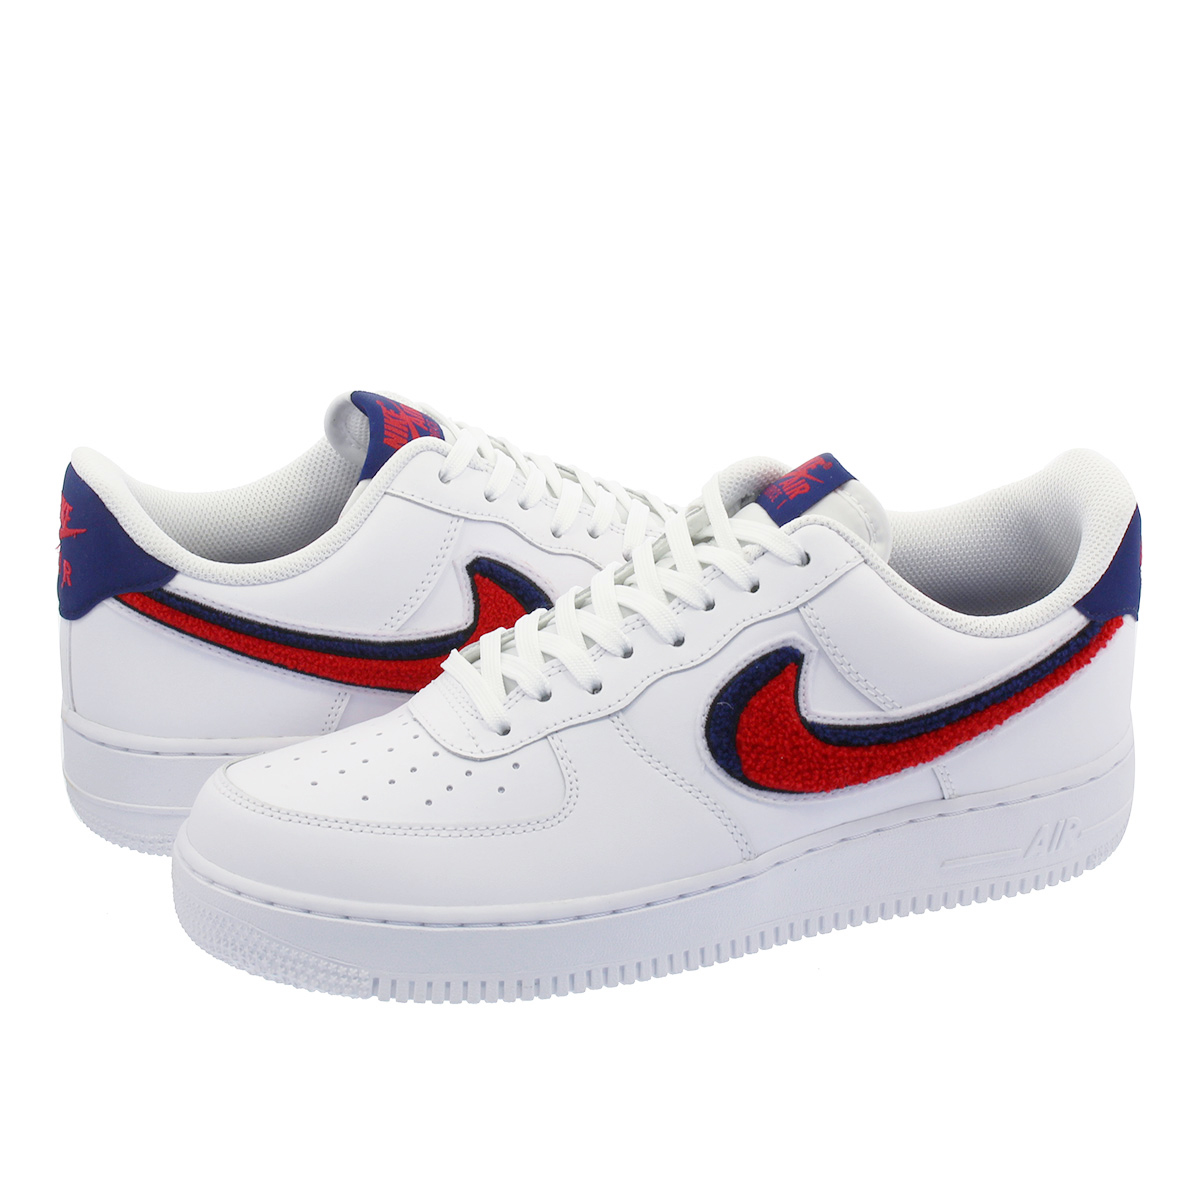 red and blue air force 1s